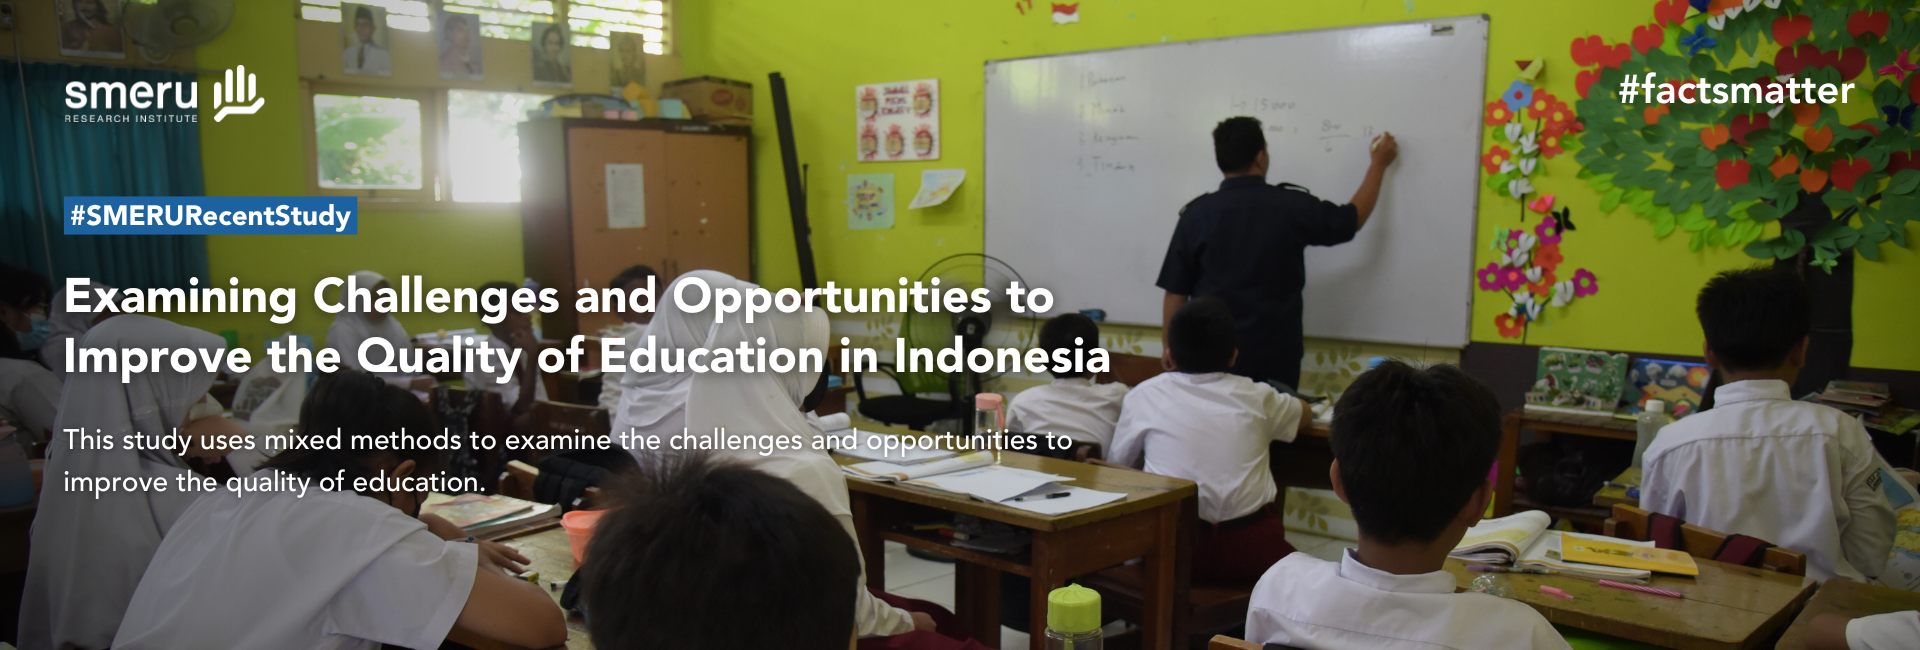 Examining Challenges and Opportunities to Improve the Quality of Education in Indonesia